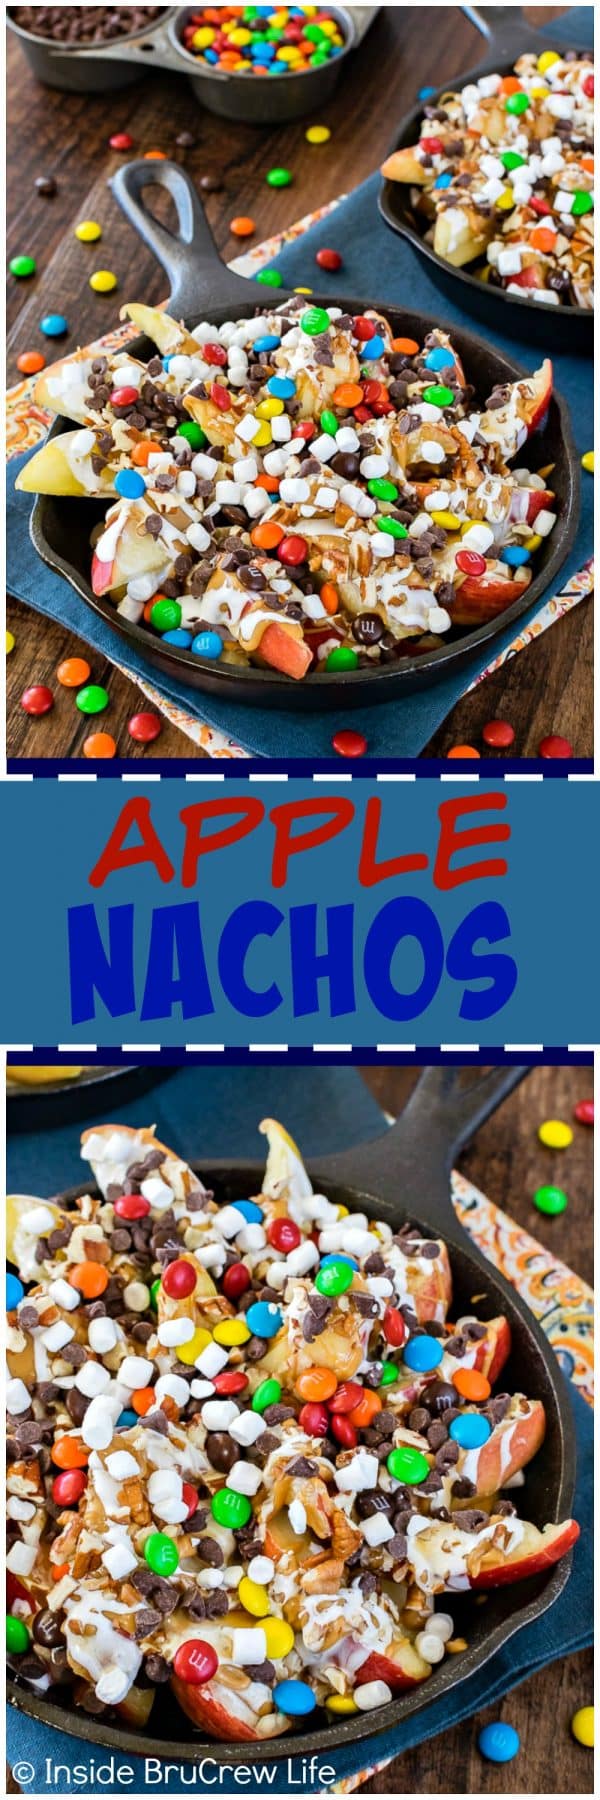 Apple Nachos - drizzles of peanut butter, caramel, and plenty of candy makes these sliced apples a fun after school snack. This is also a fun no bake recipe for kids to make at parties!!